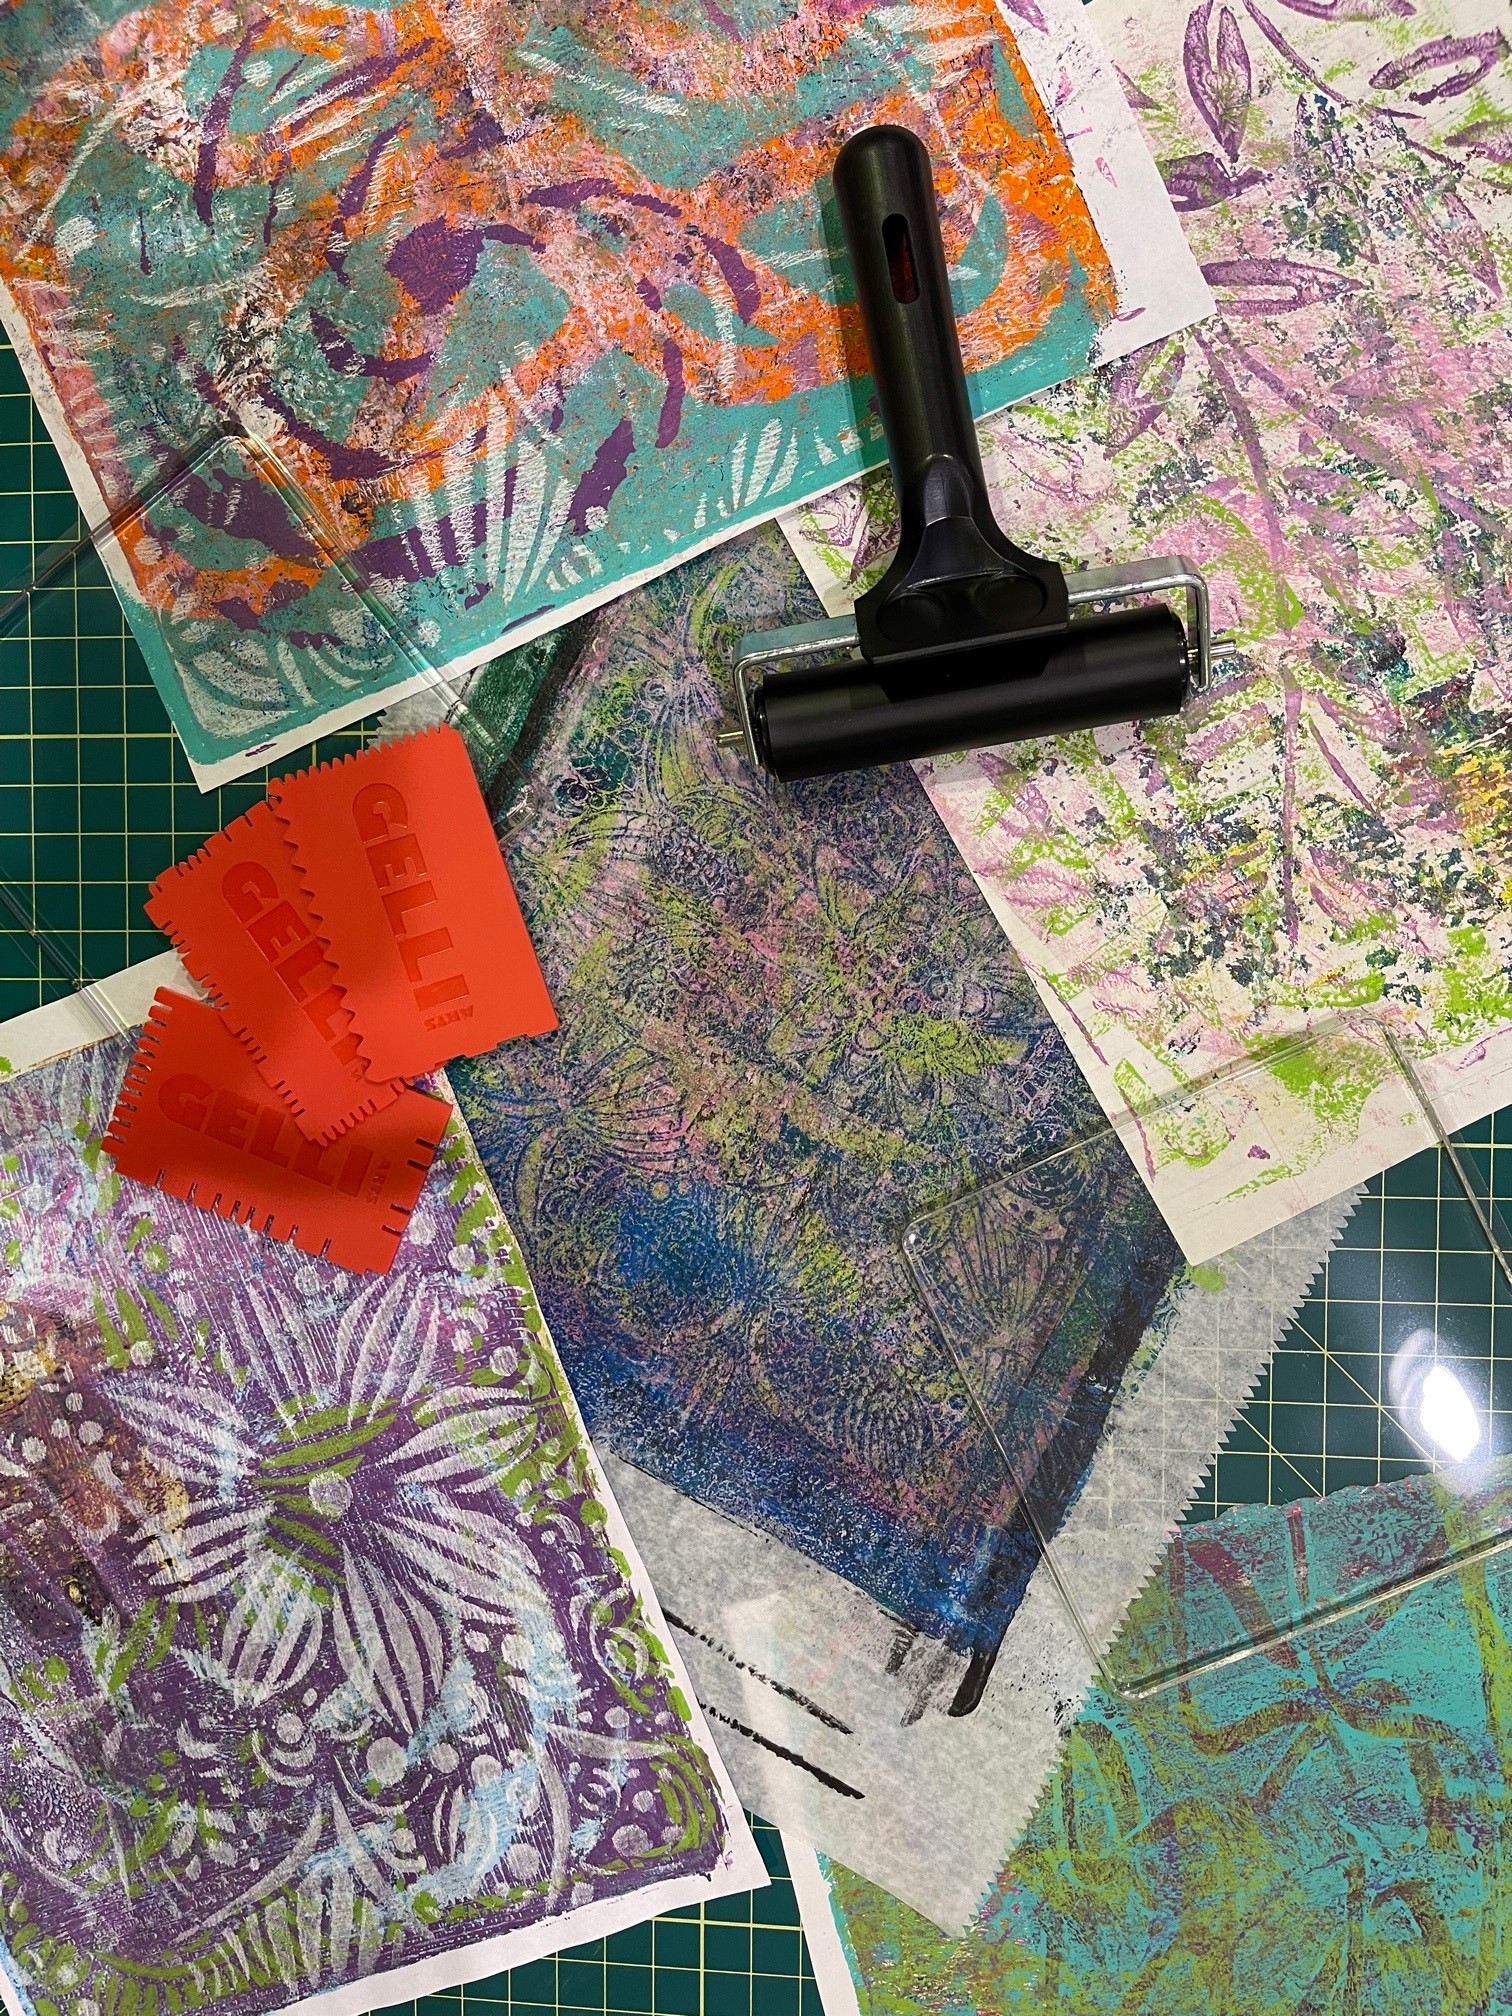 image of prints made using silicone gel slabs and brayer